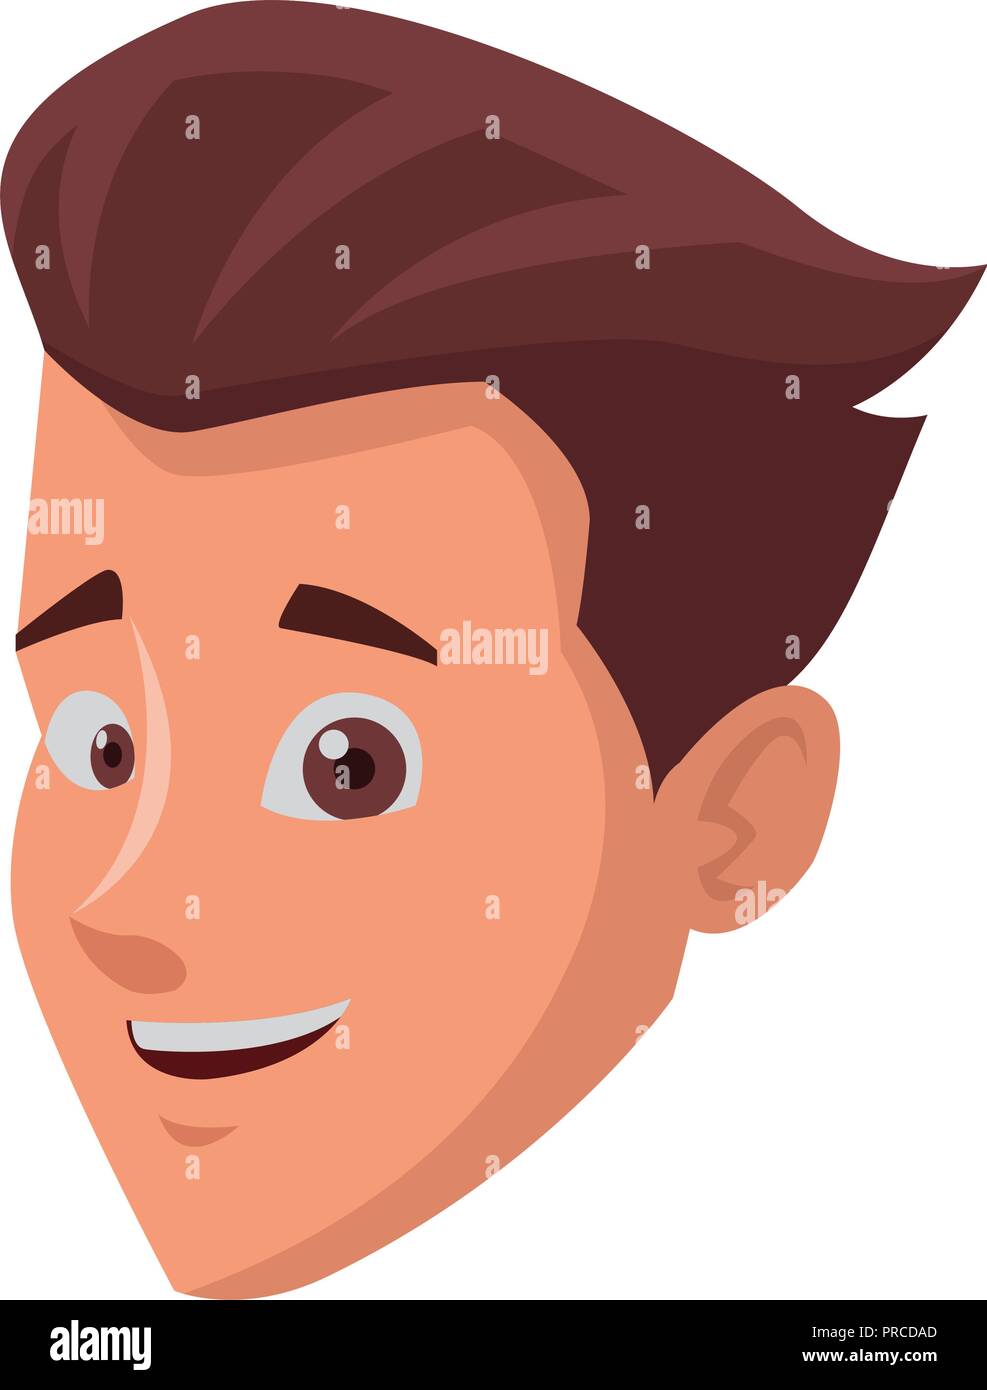 animated human face